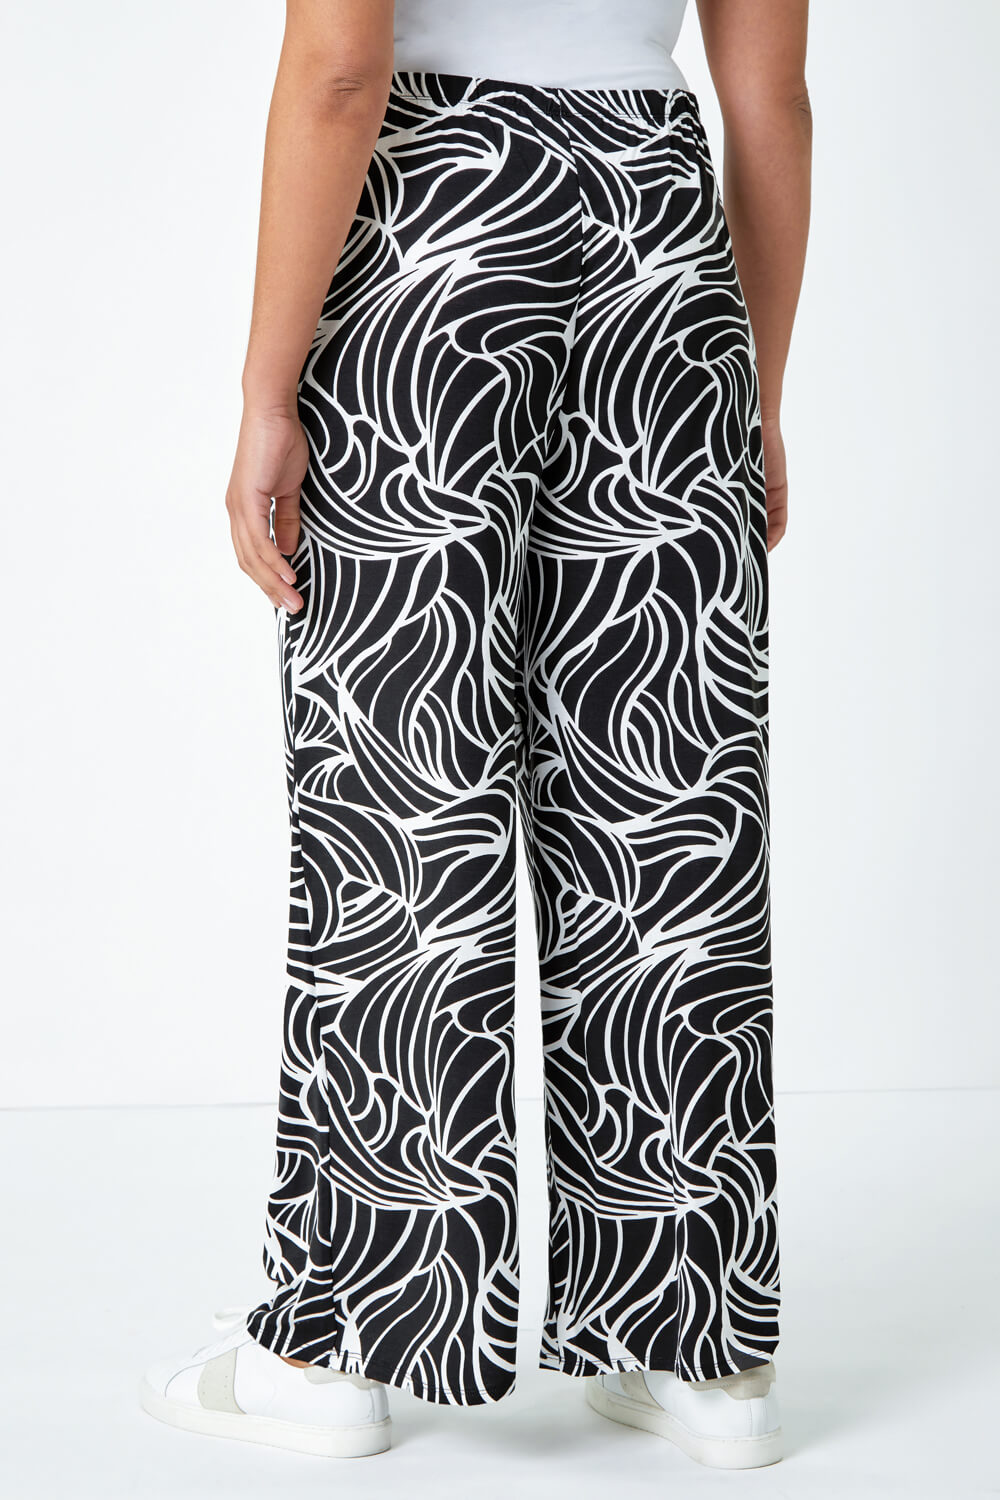 Black Curve Linear Print Palazzo Stretch Trousers, Image 3 of 5